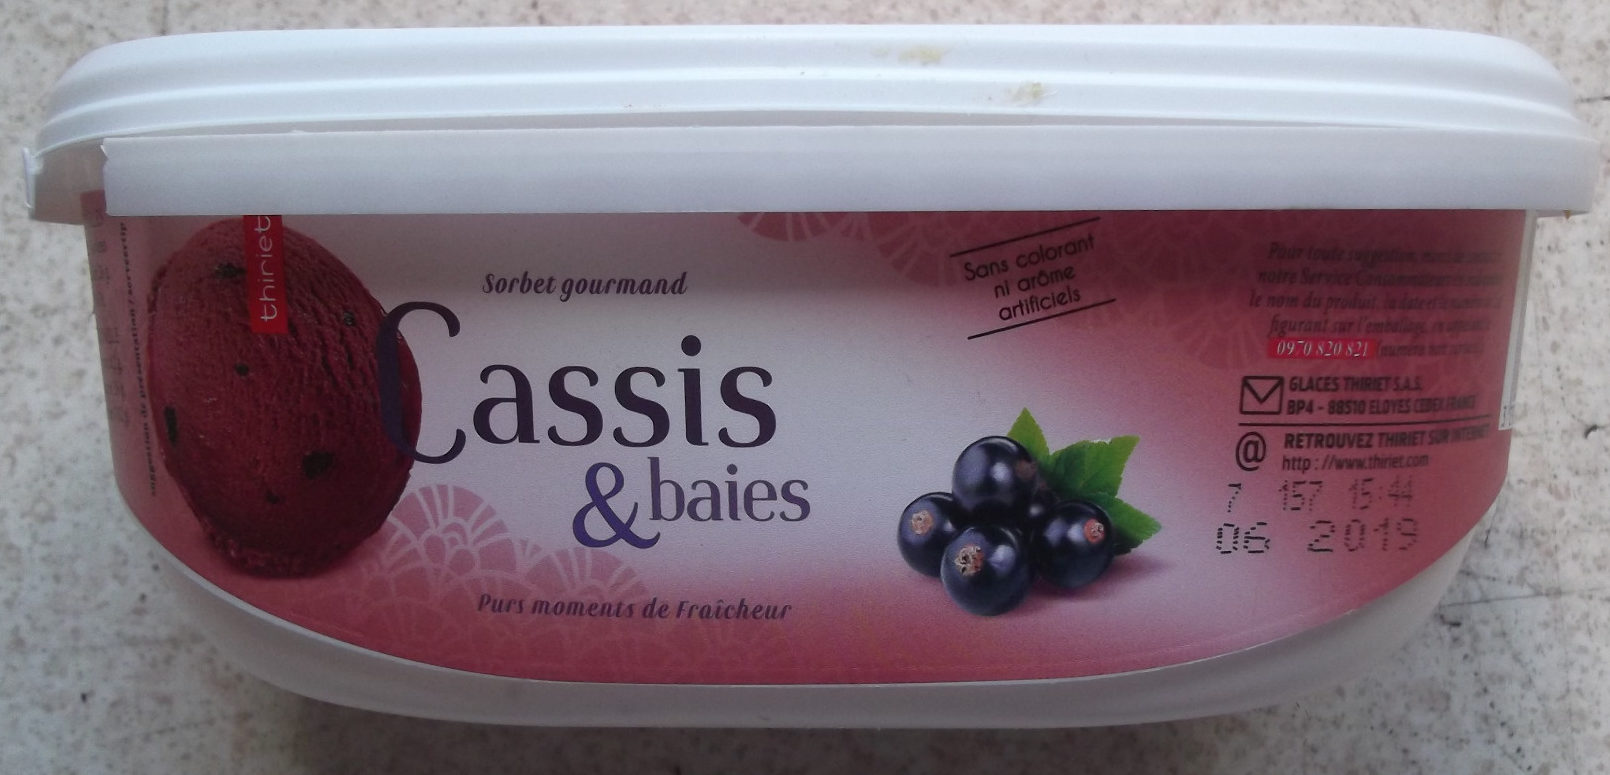 Cassis & baies - Sorbet gourmand - Product - fr